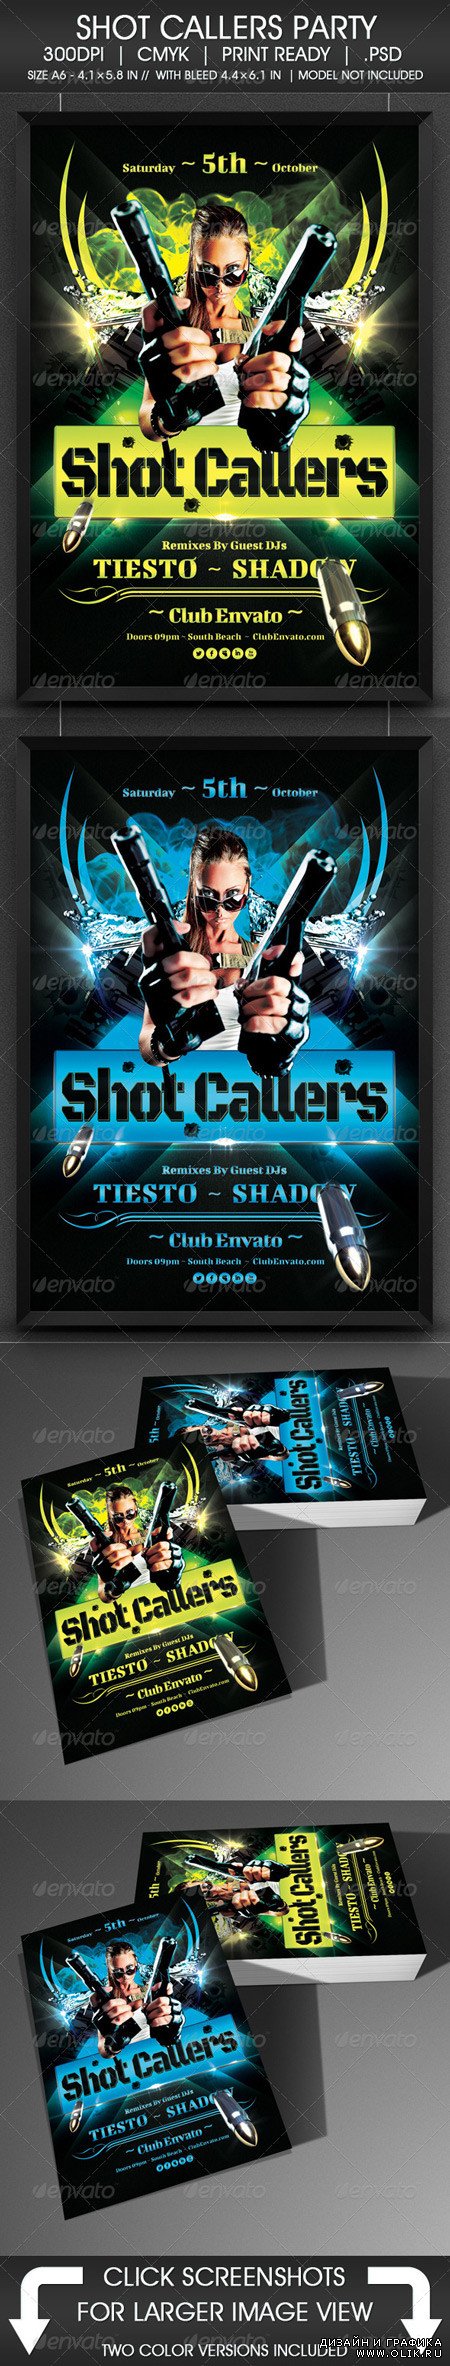 Shot Callers Party Flyer